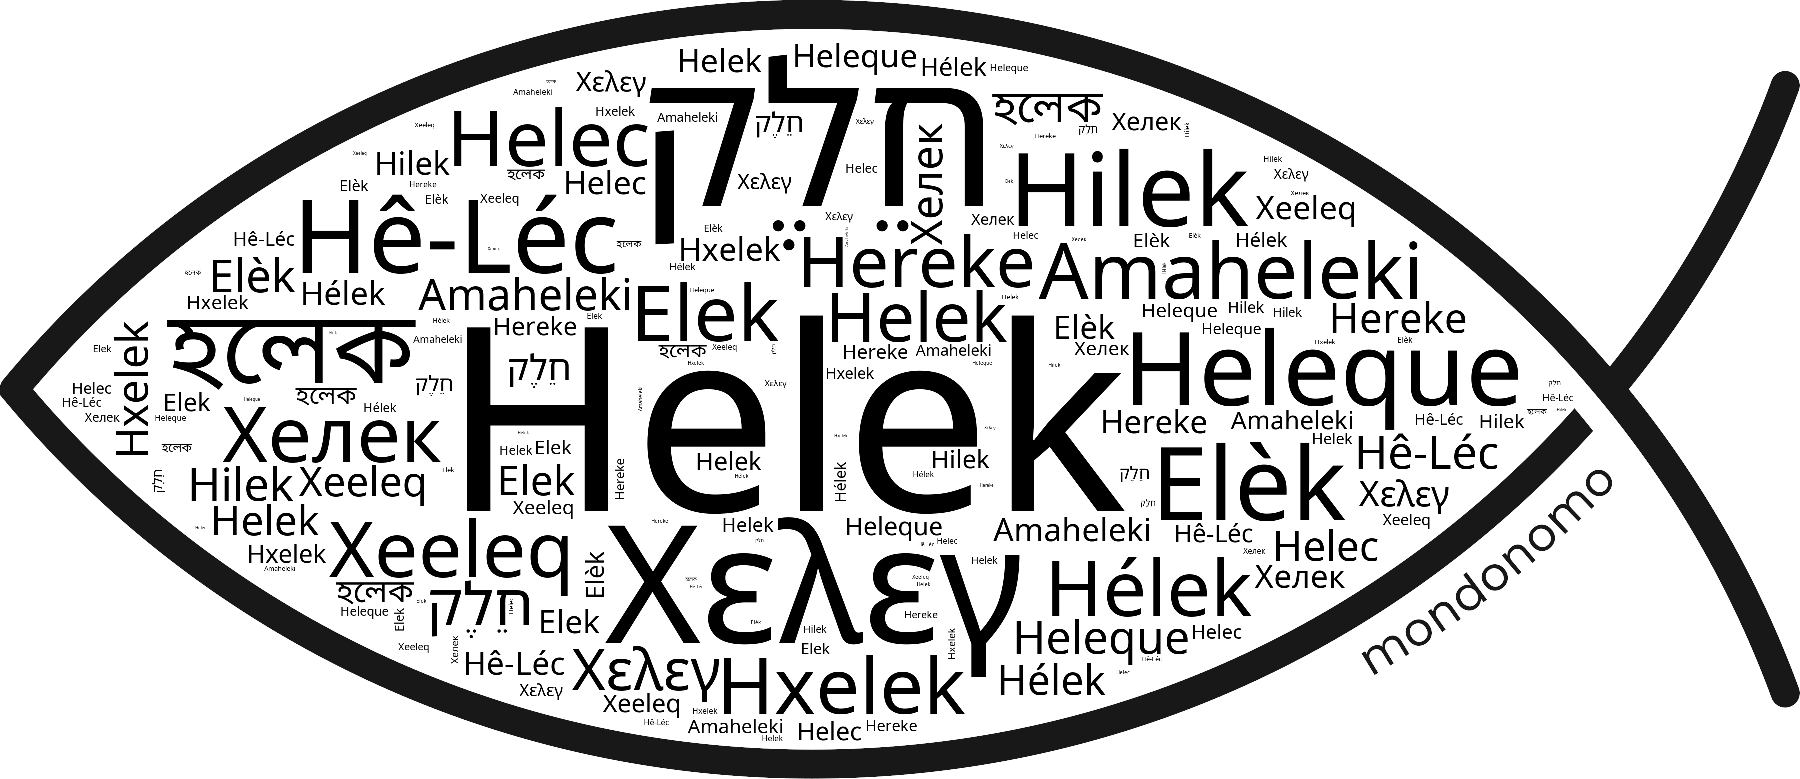 Name Helek in the world's Bibles